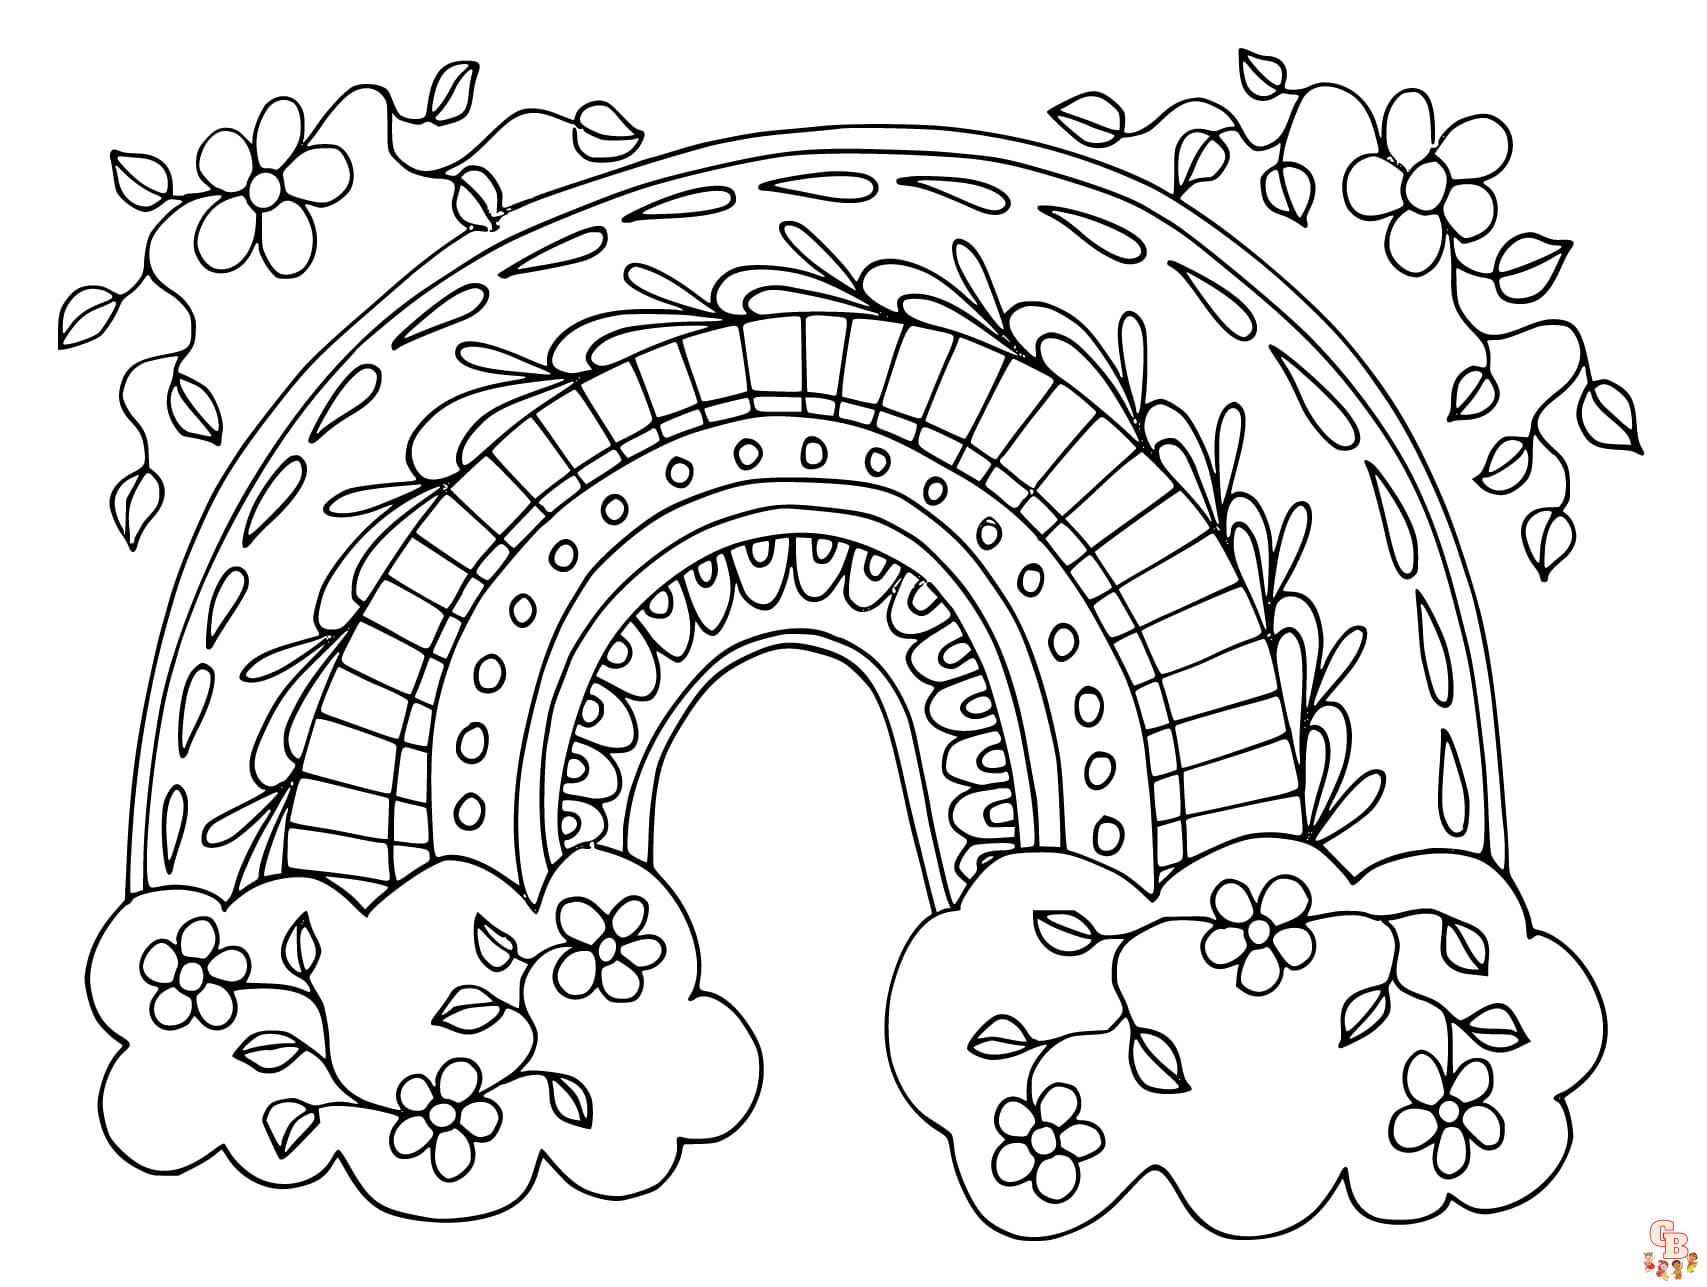 Heaven coloring pages to print